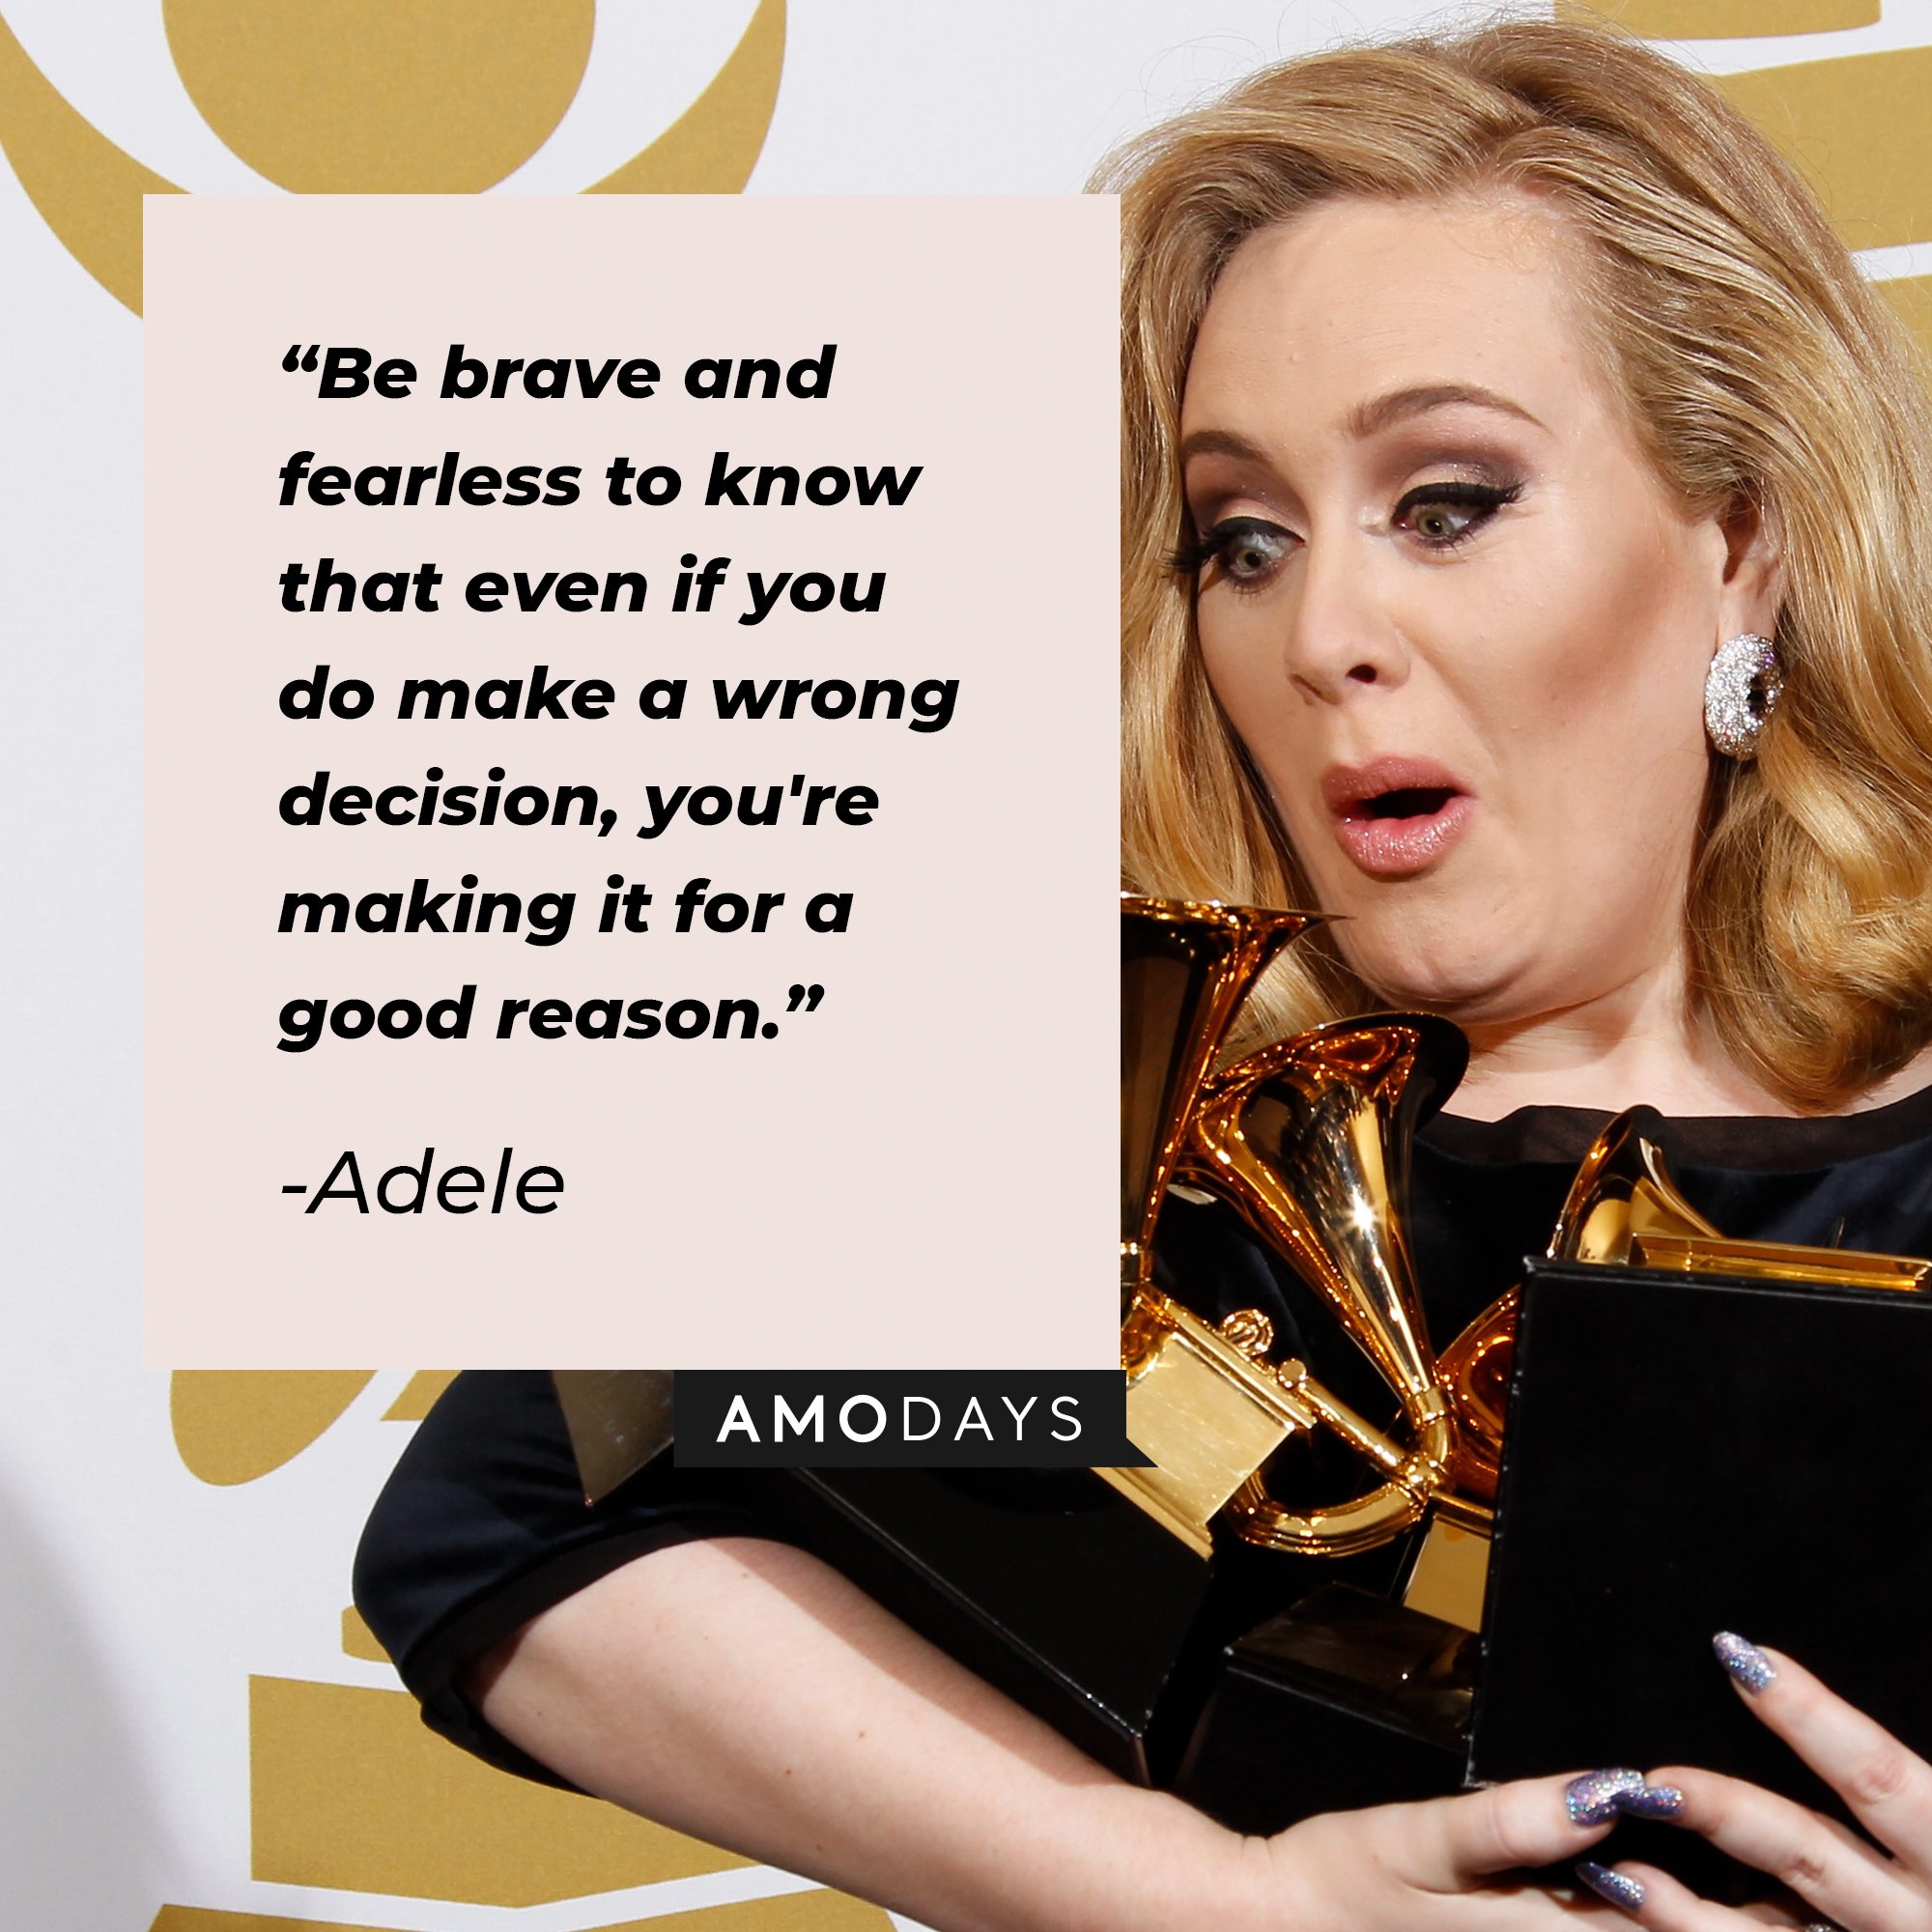 Adele’s quote: "Be brave and fearless to know that even if you do make a wrong decision, you're making it for a good reason."  | Image: AmoDays